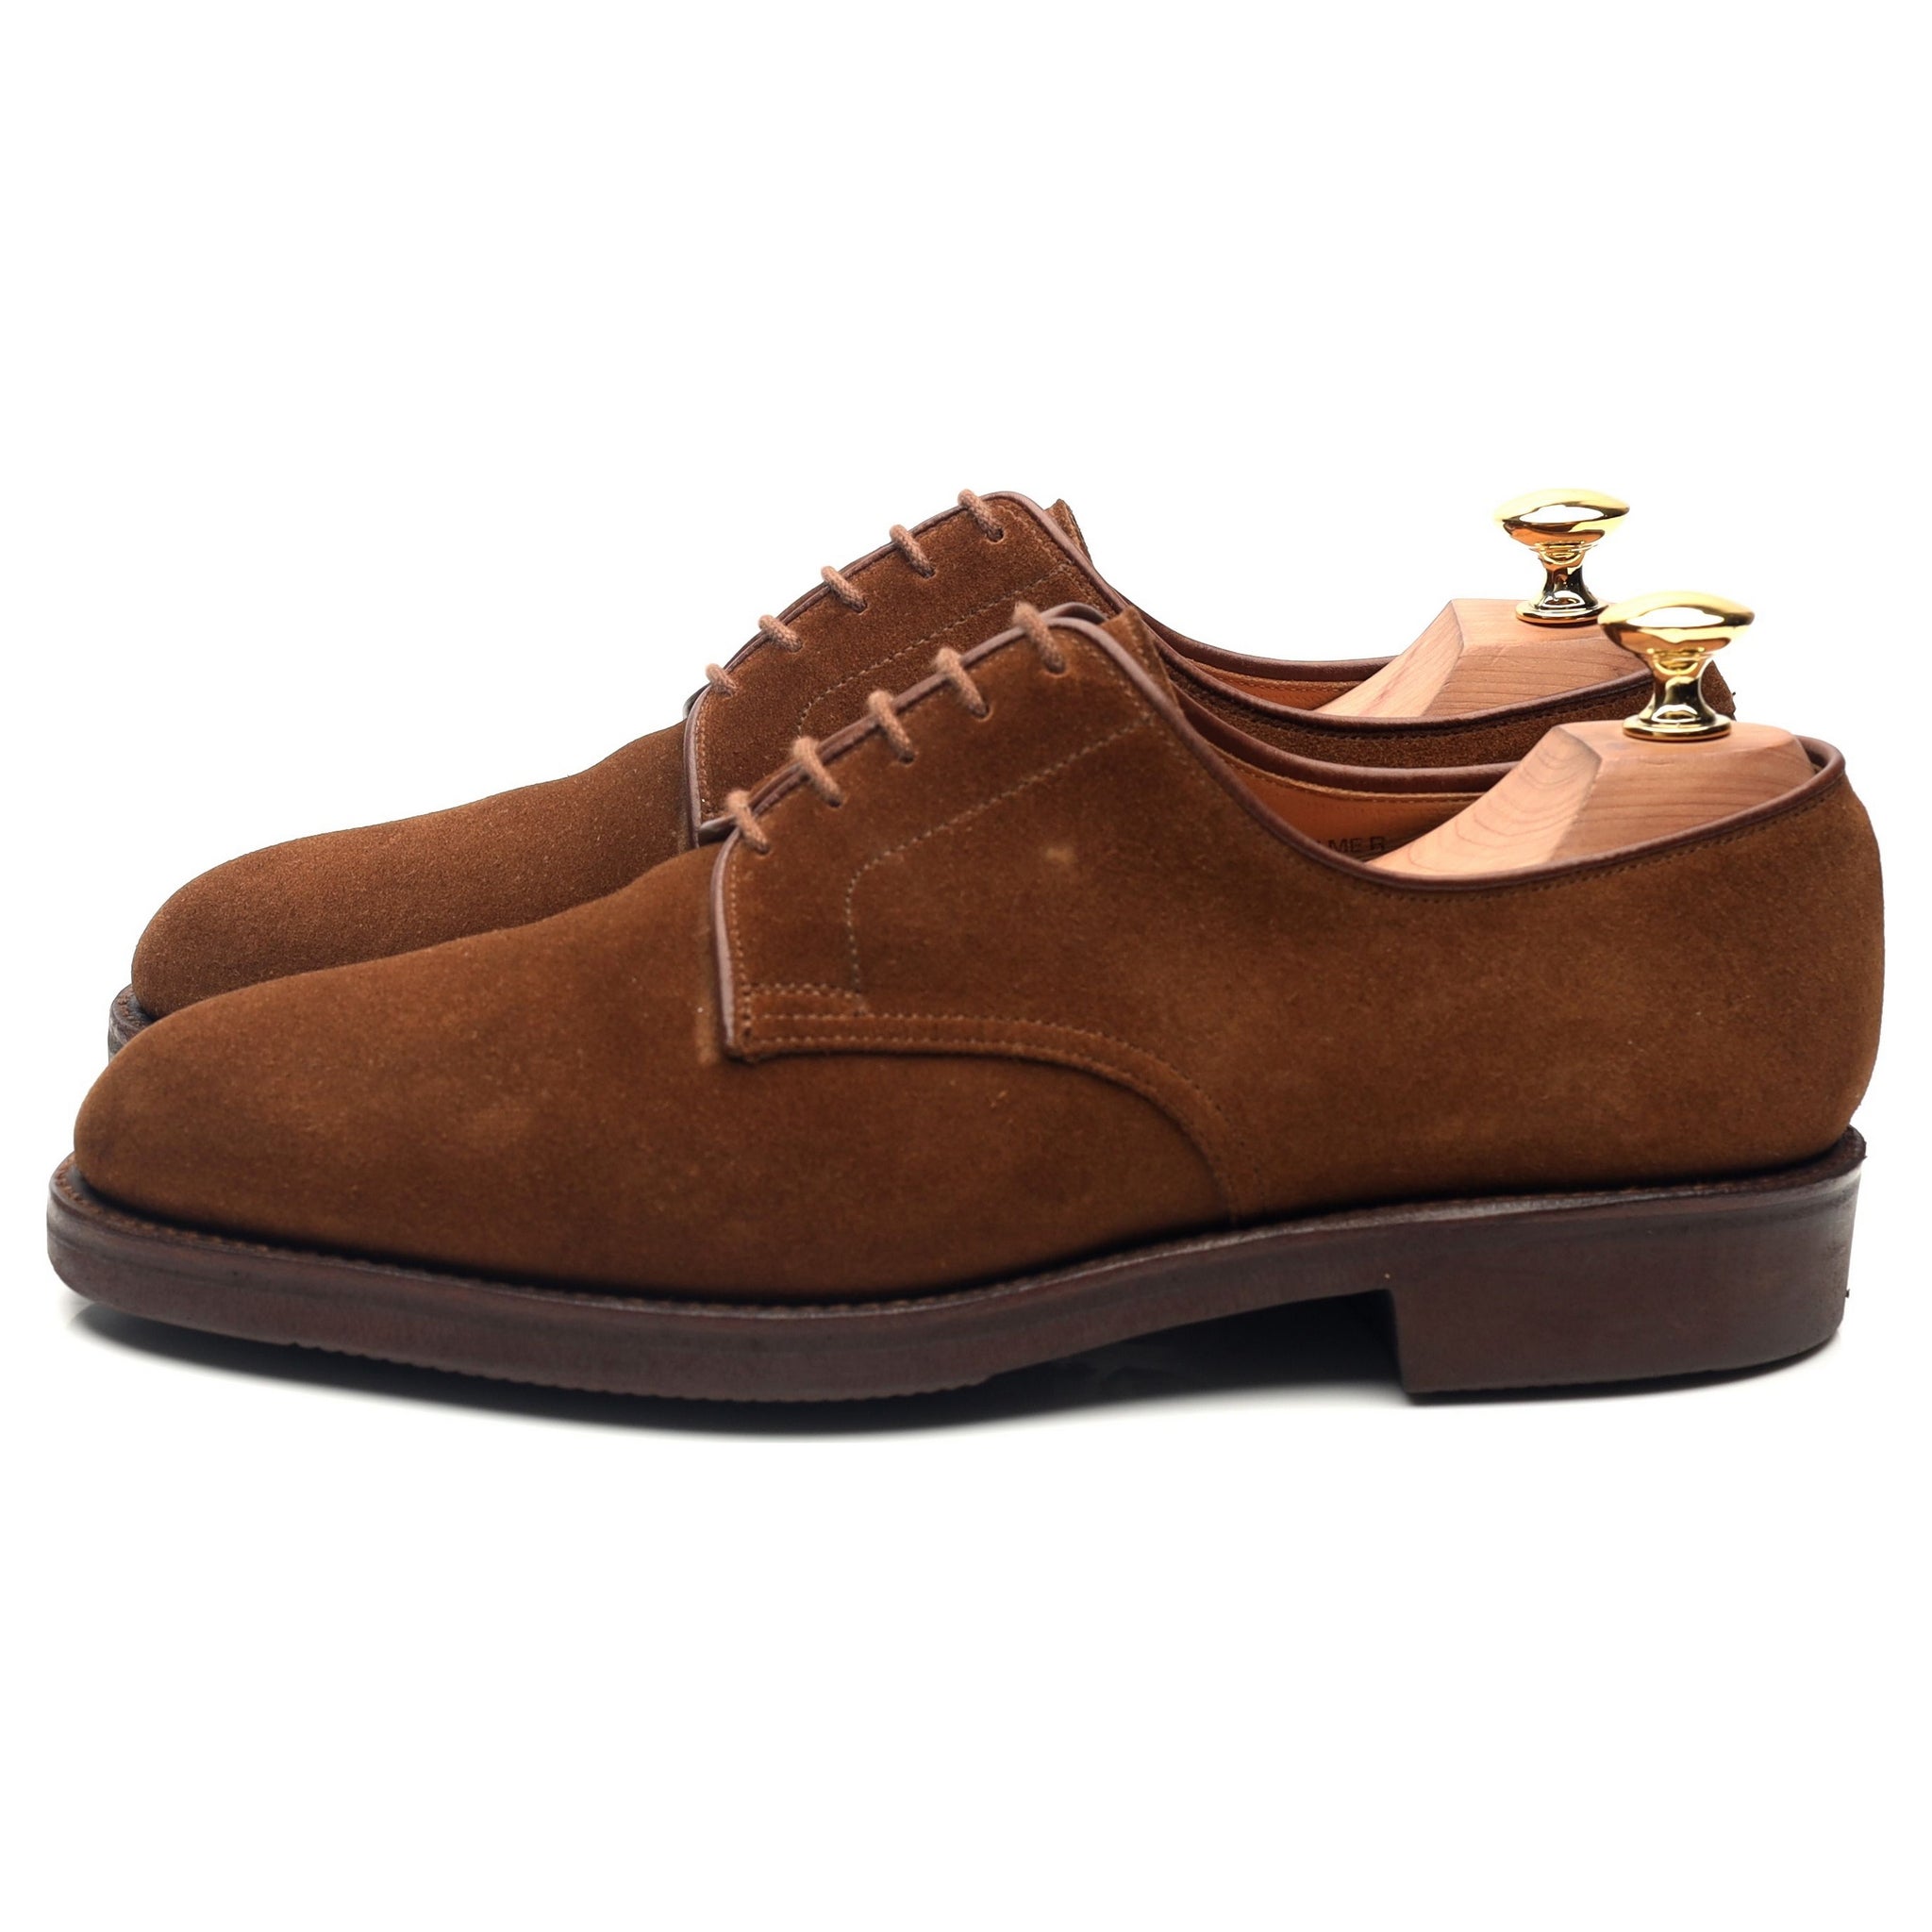 Latimer' Tan Brown Suede Derby UK 6 G - Abbot's Shoes